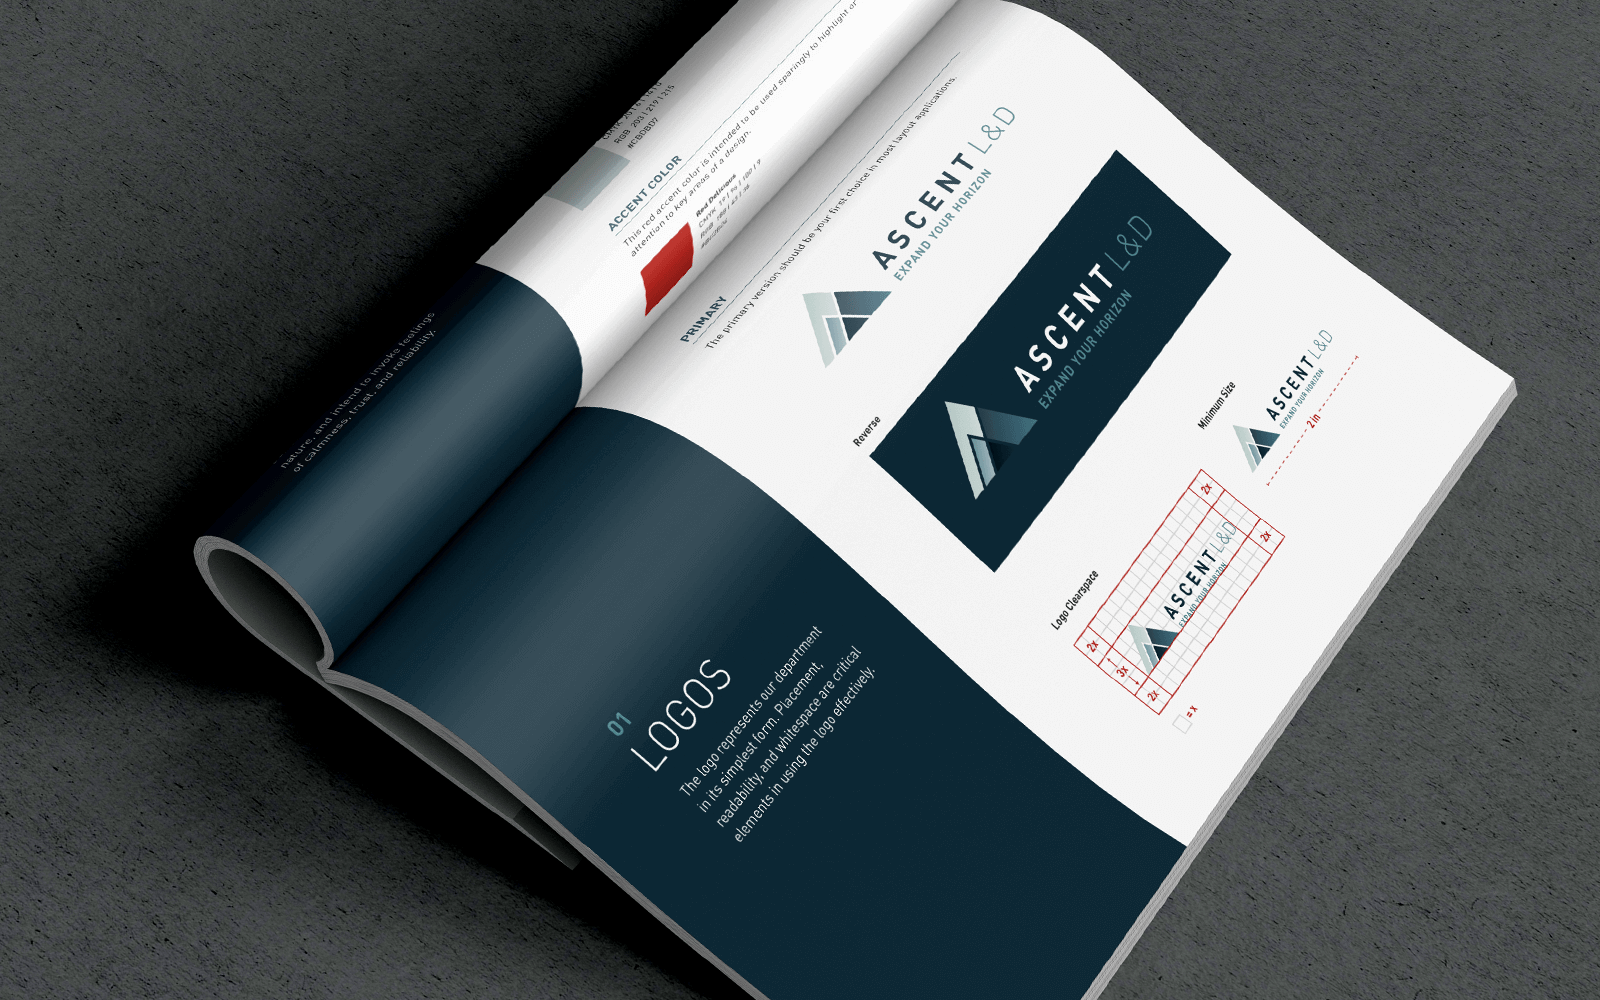 Logo page from brand guidelines